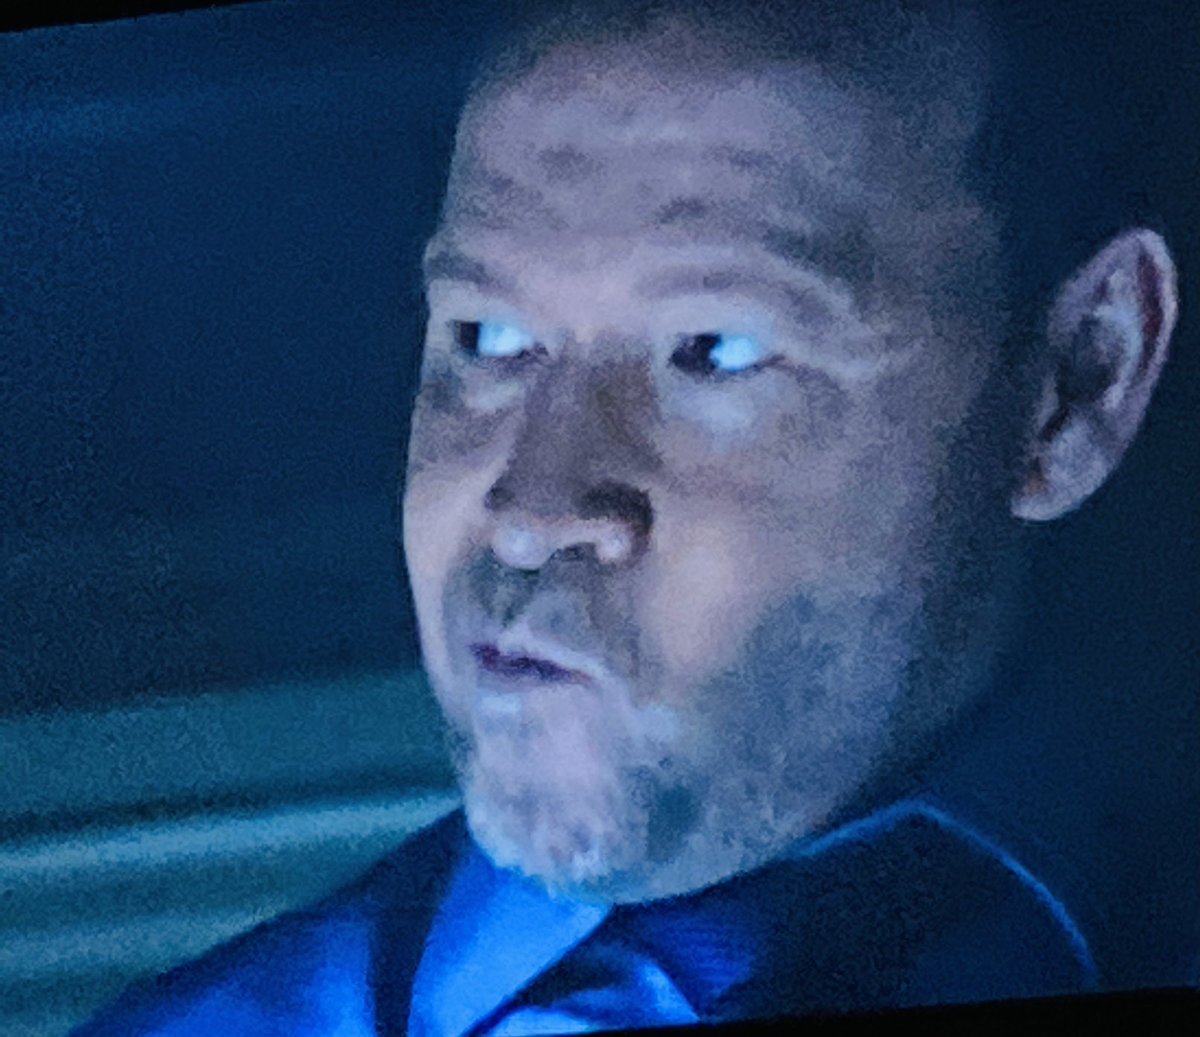 Keep this face on Friday night! One of my favorite Danny Reagan faces! Please #SaveBlueBloods @DonnieWahlberg #BlueBloods